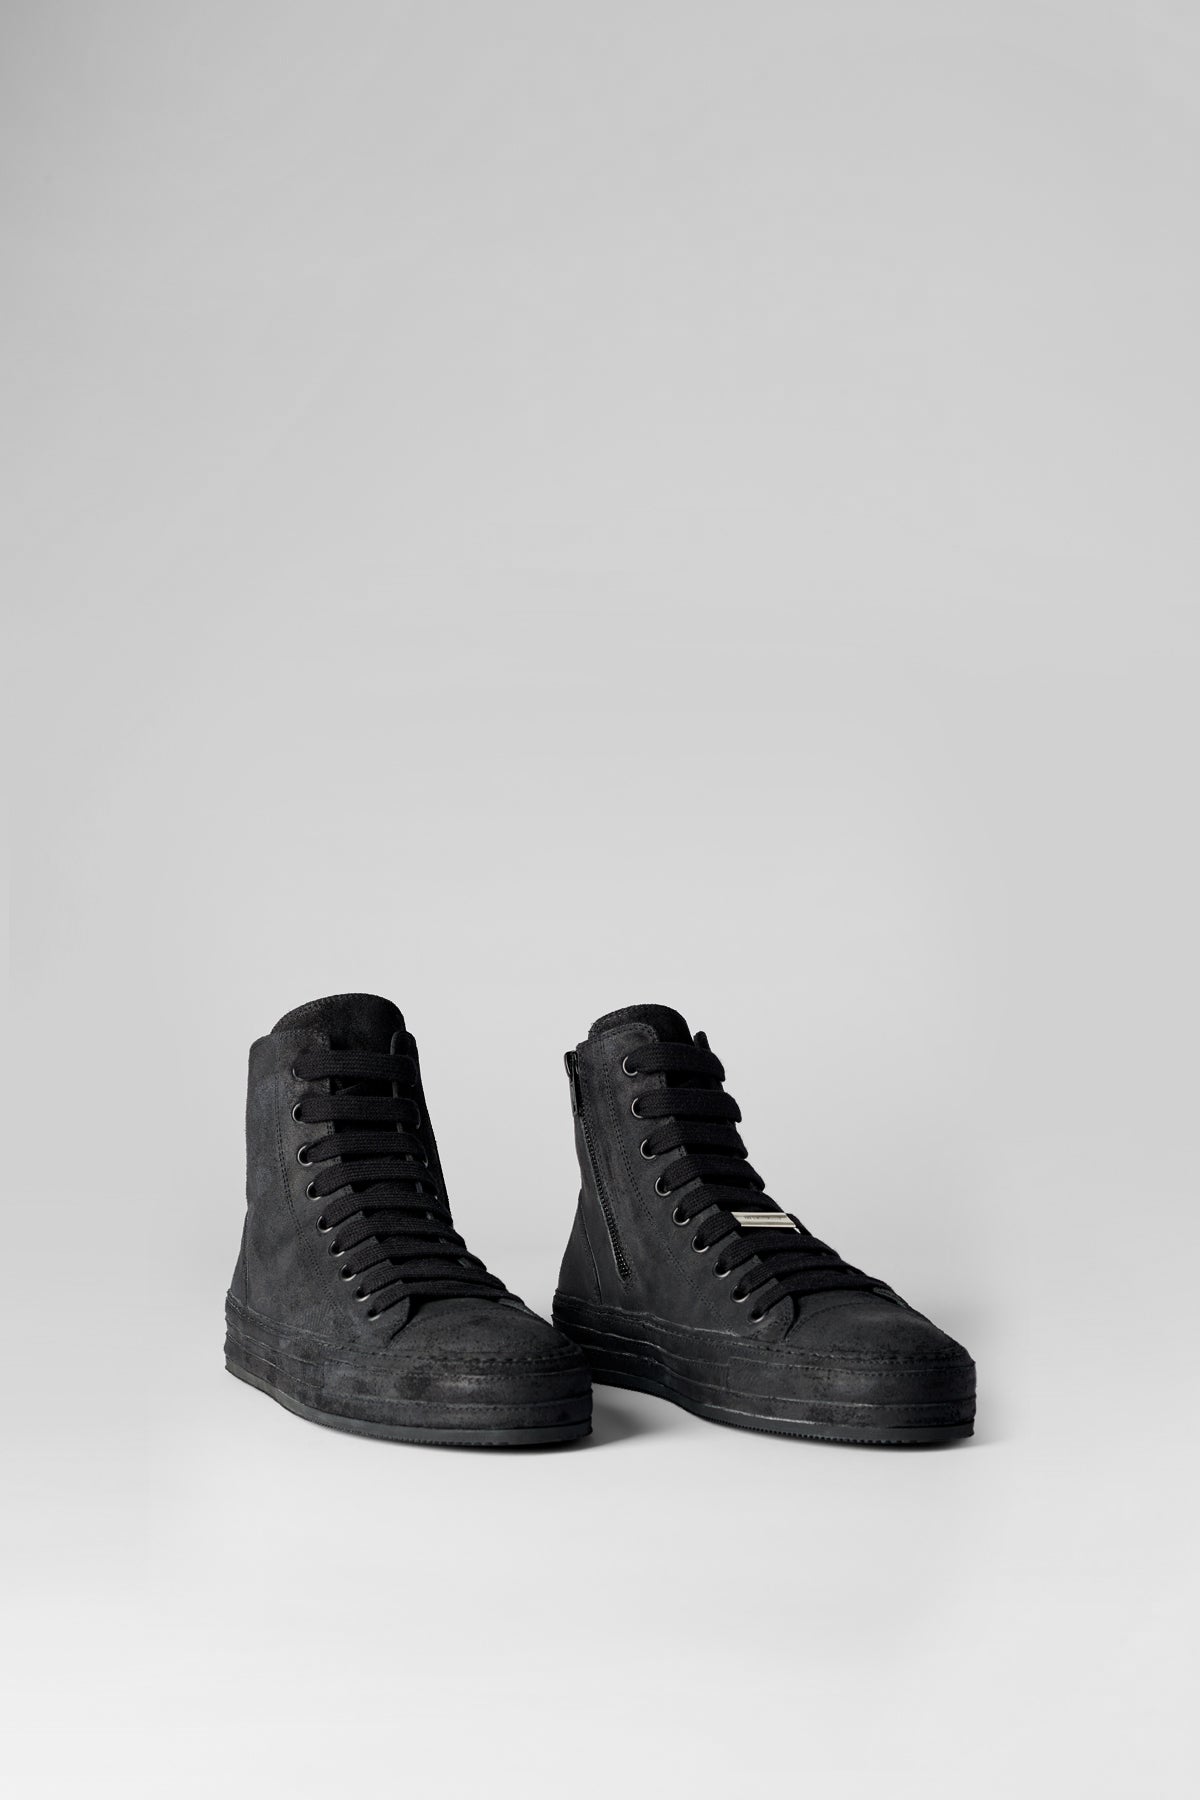 Sneakers Collection - Ann Demeulemeester